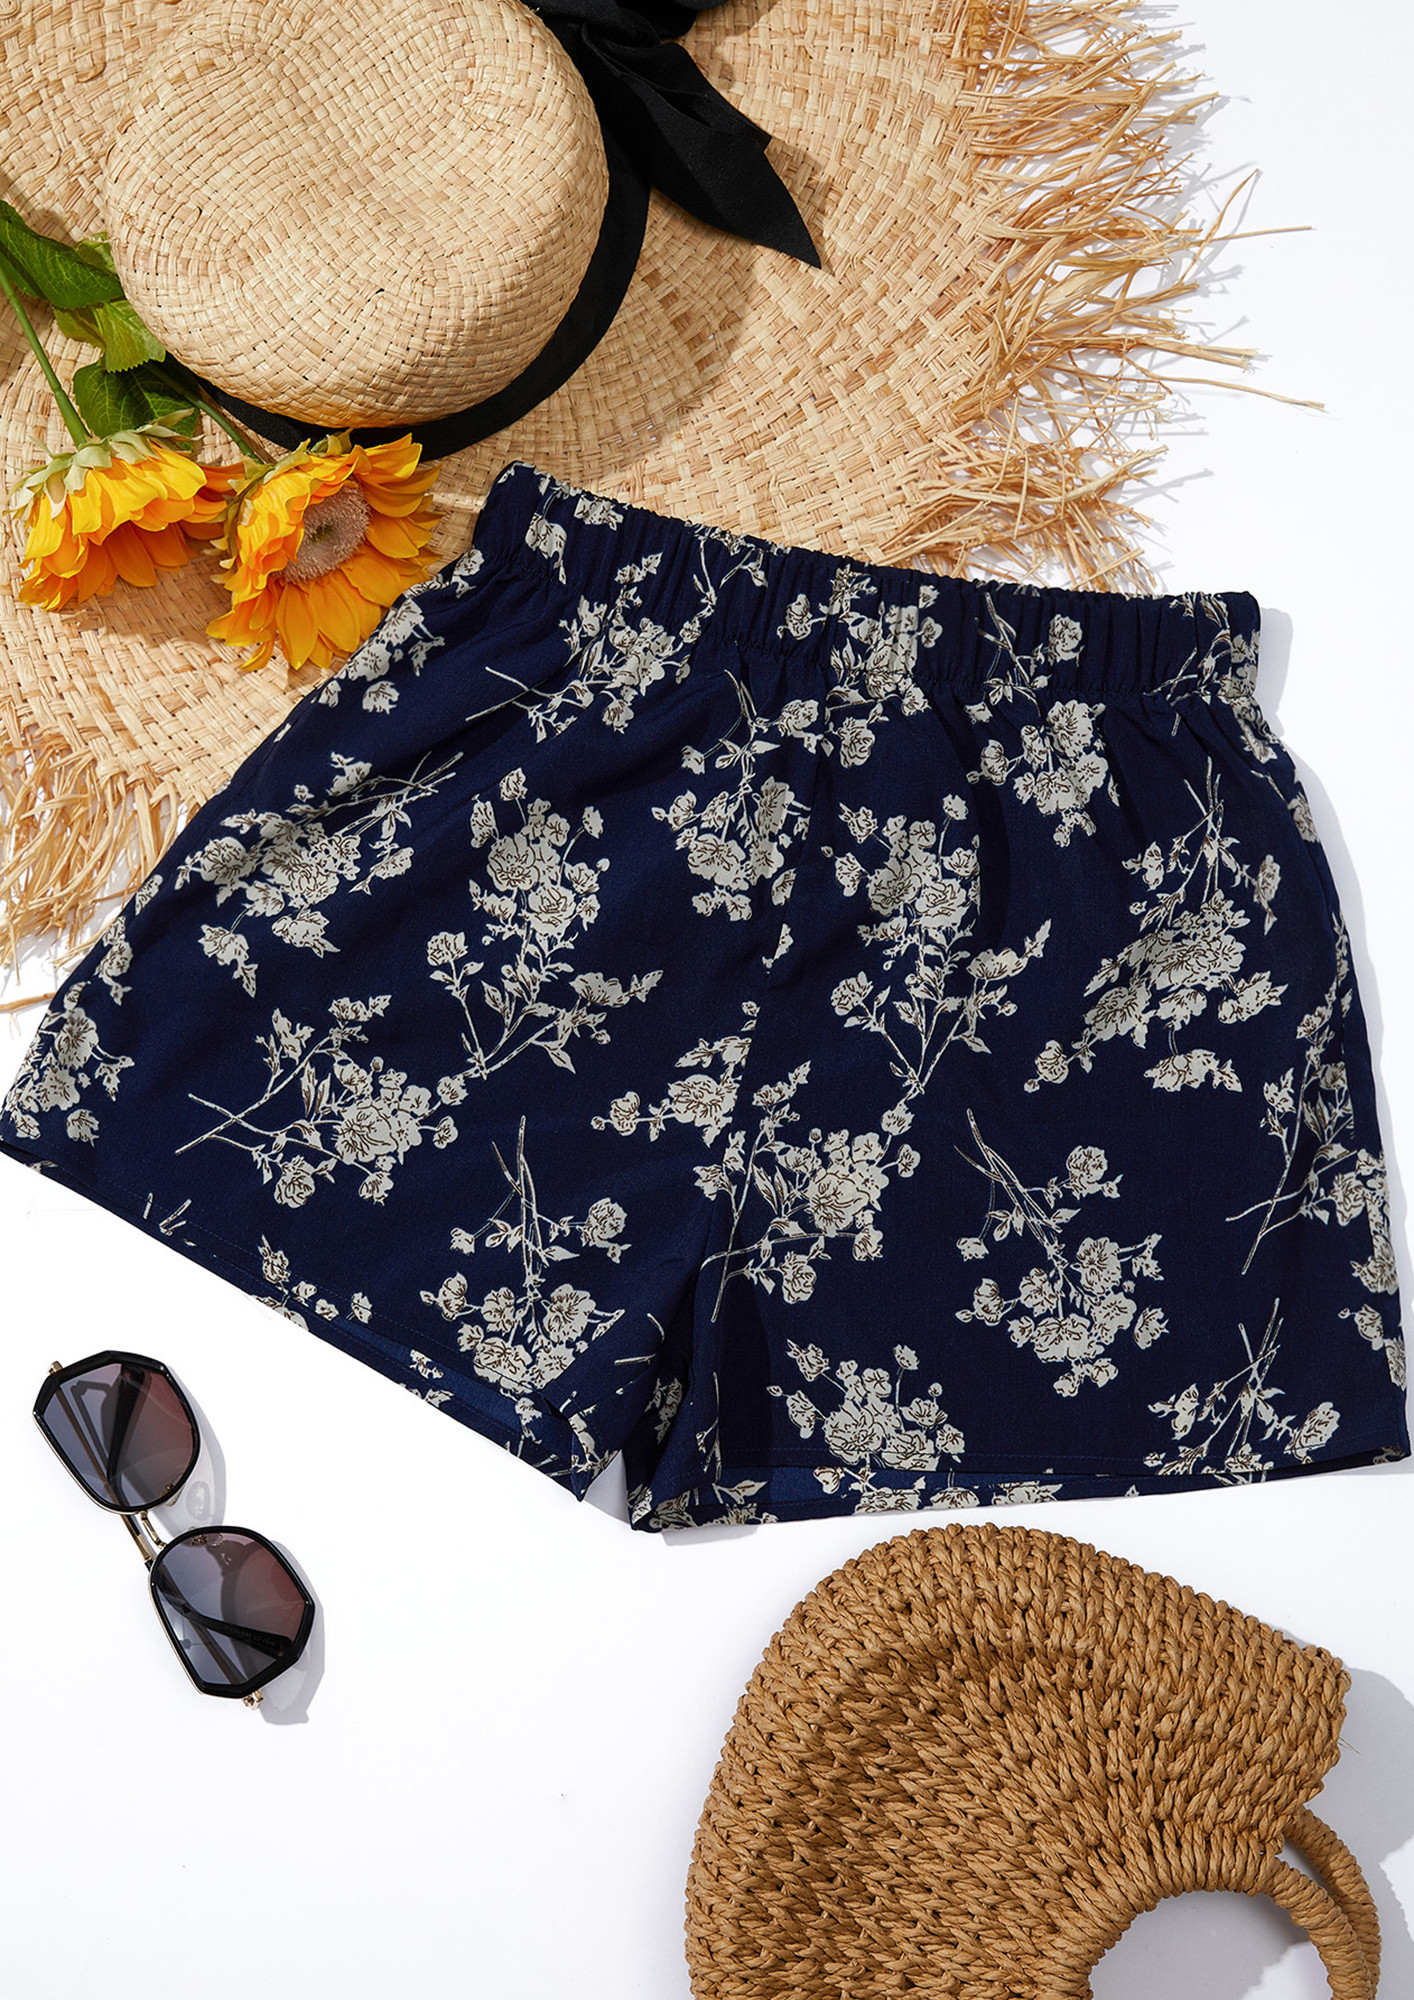 READY FOR A TRIP IN MY NAVY-BLUE, FLORAL PRINT, MID-RISE, CASUAL, BEACH SHORTS